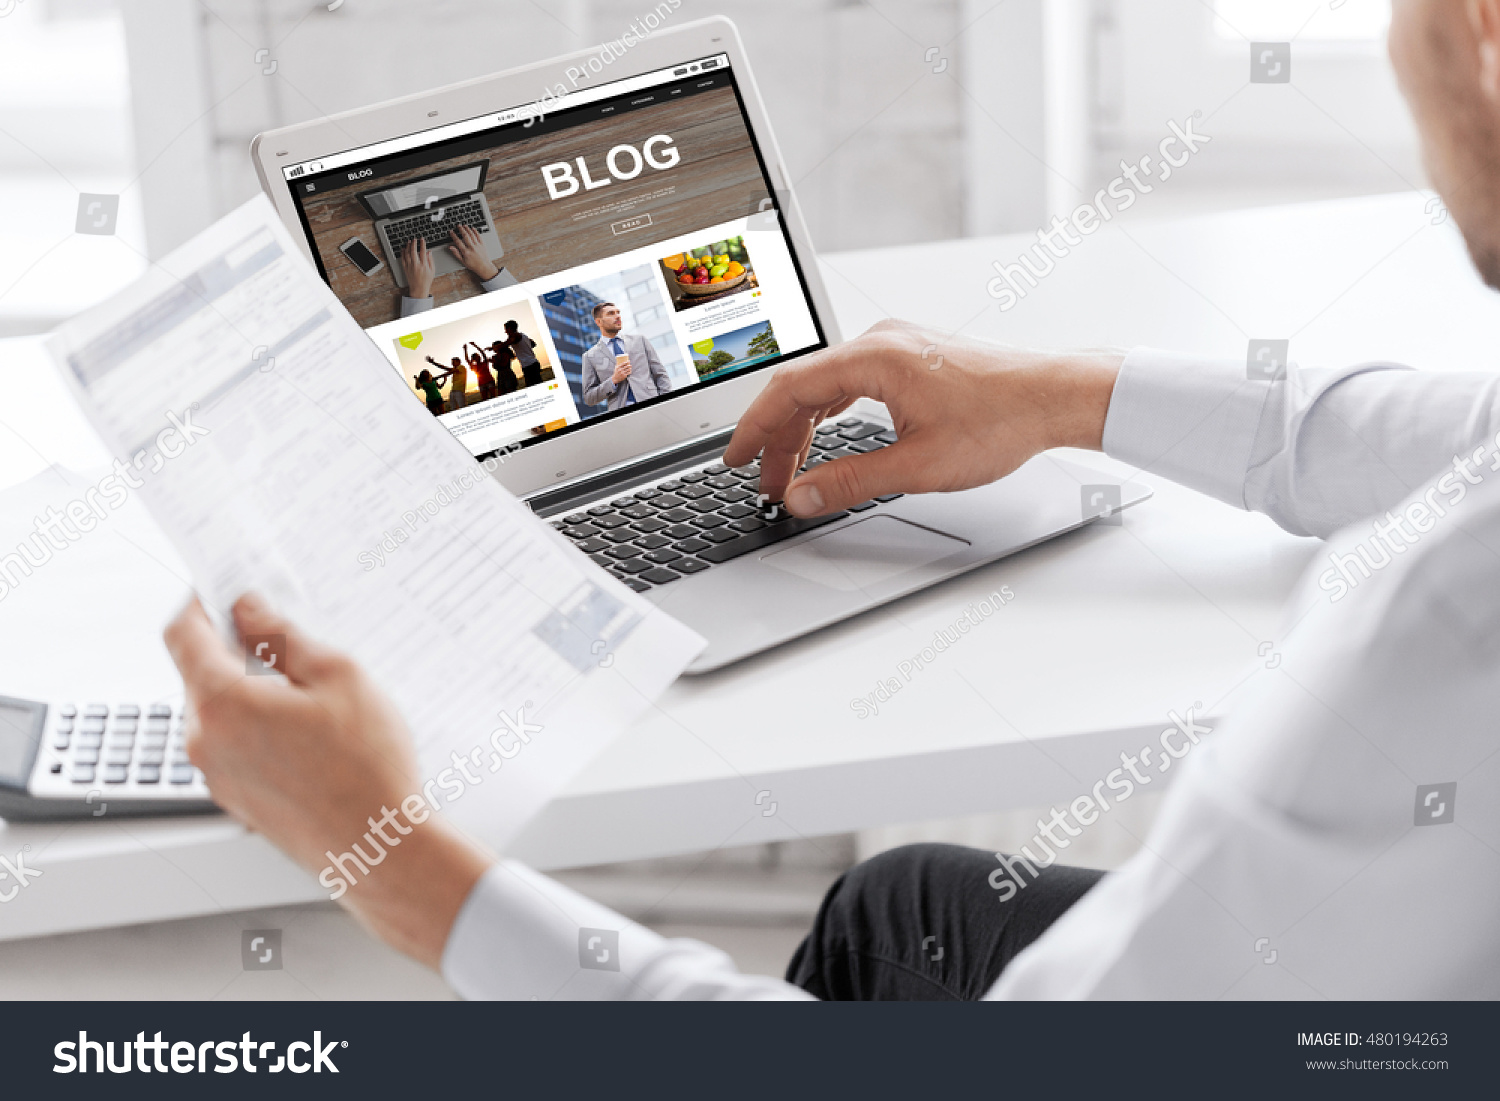 business, blogging, technology and people concept - businessman with internet blog page on laptop computer screen working at office #480194263